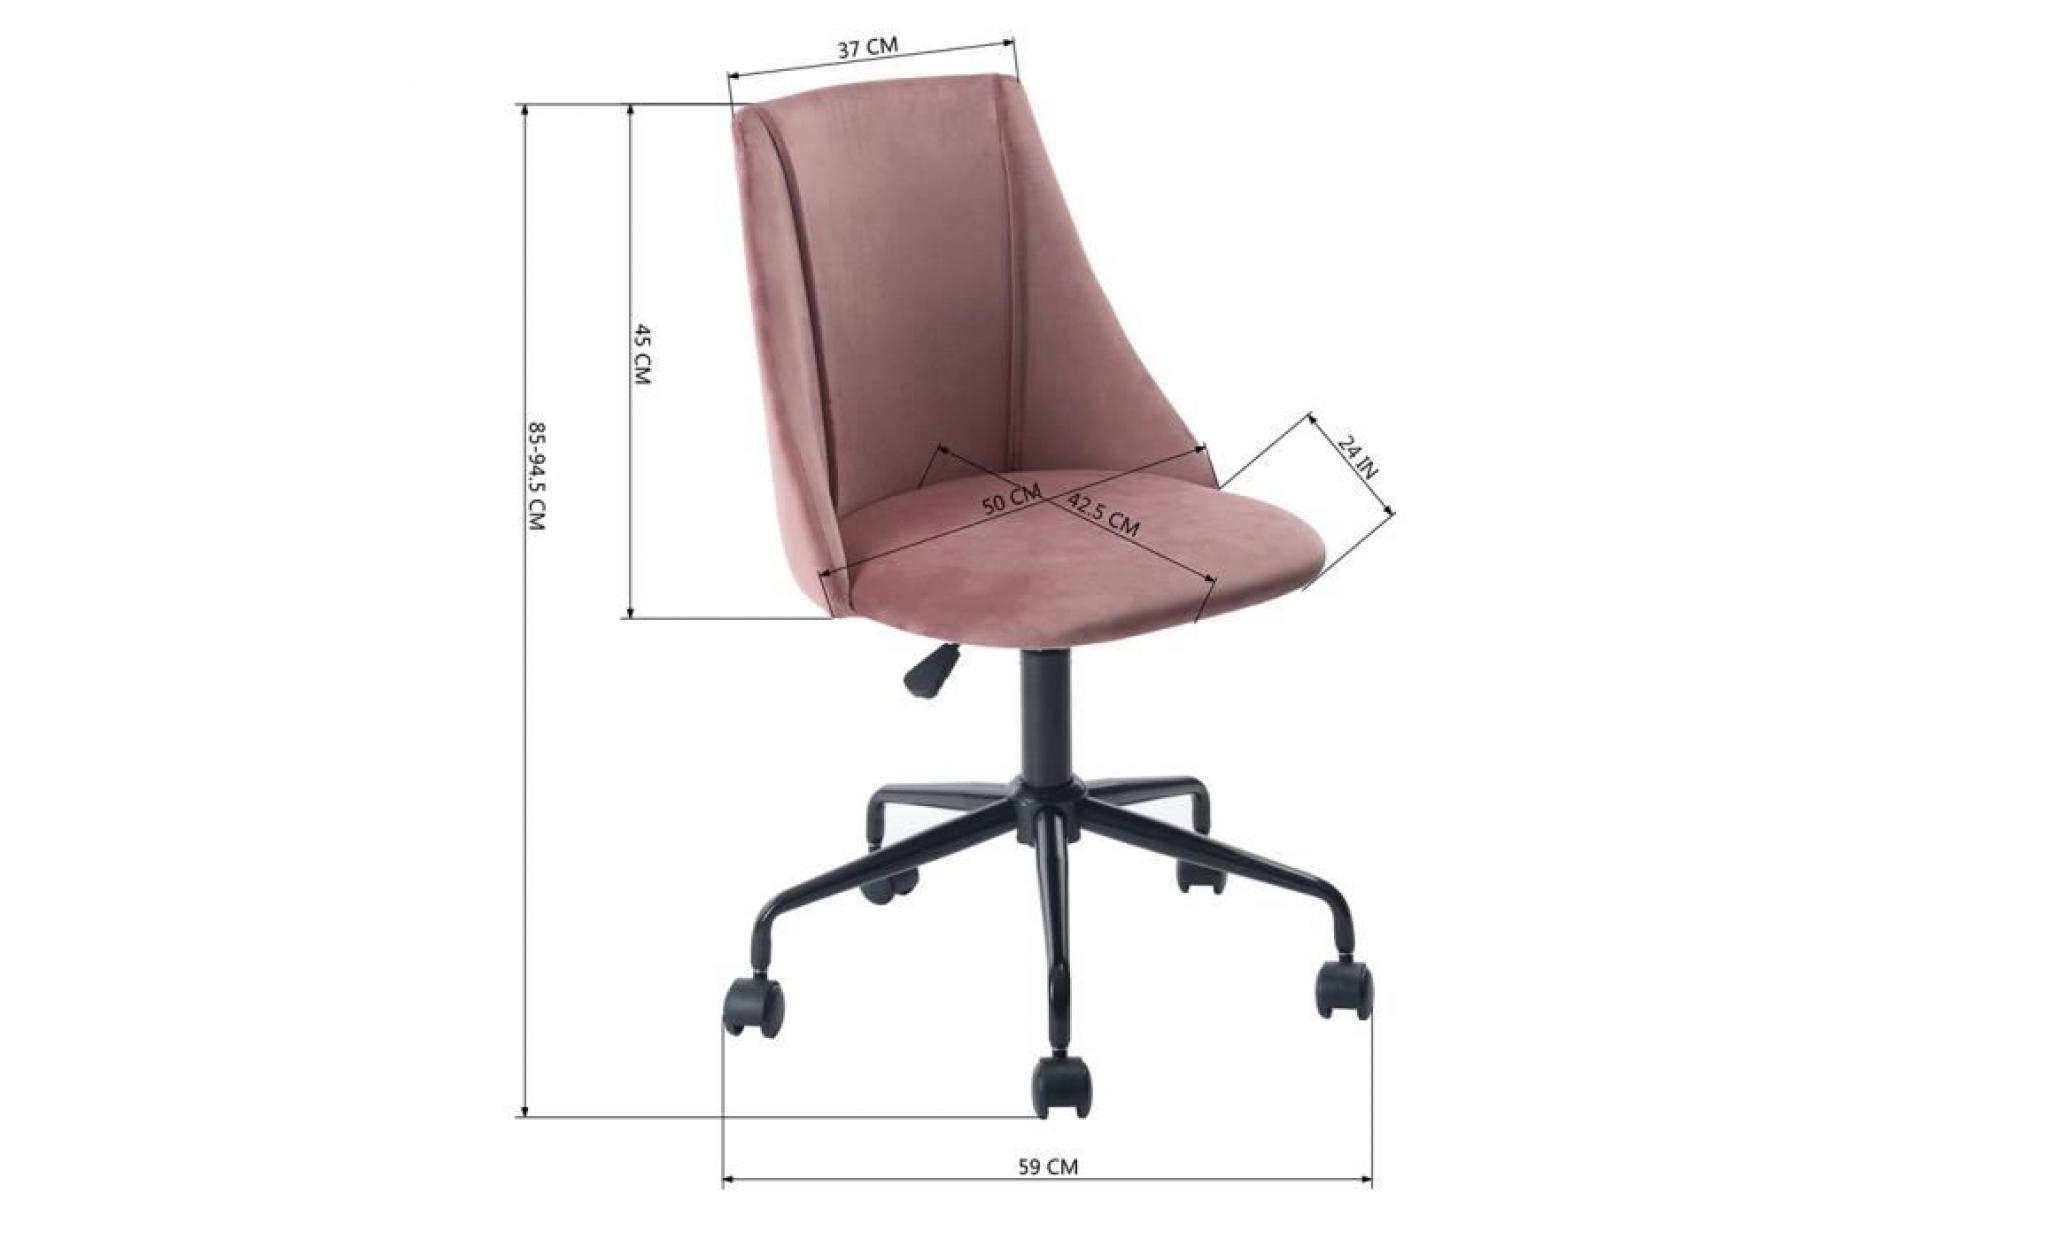 furnish 1 velvet office chair padded velvet foam seat with rotation height and casters,gris pas cher